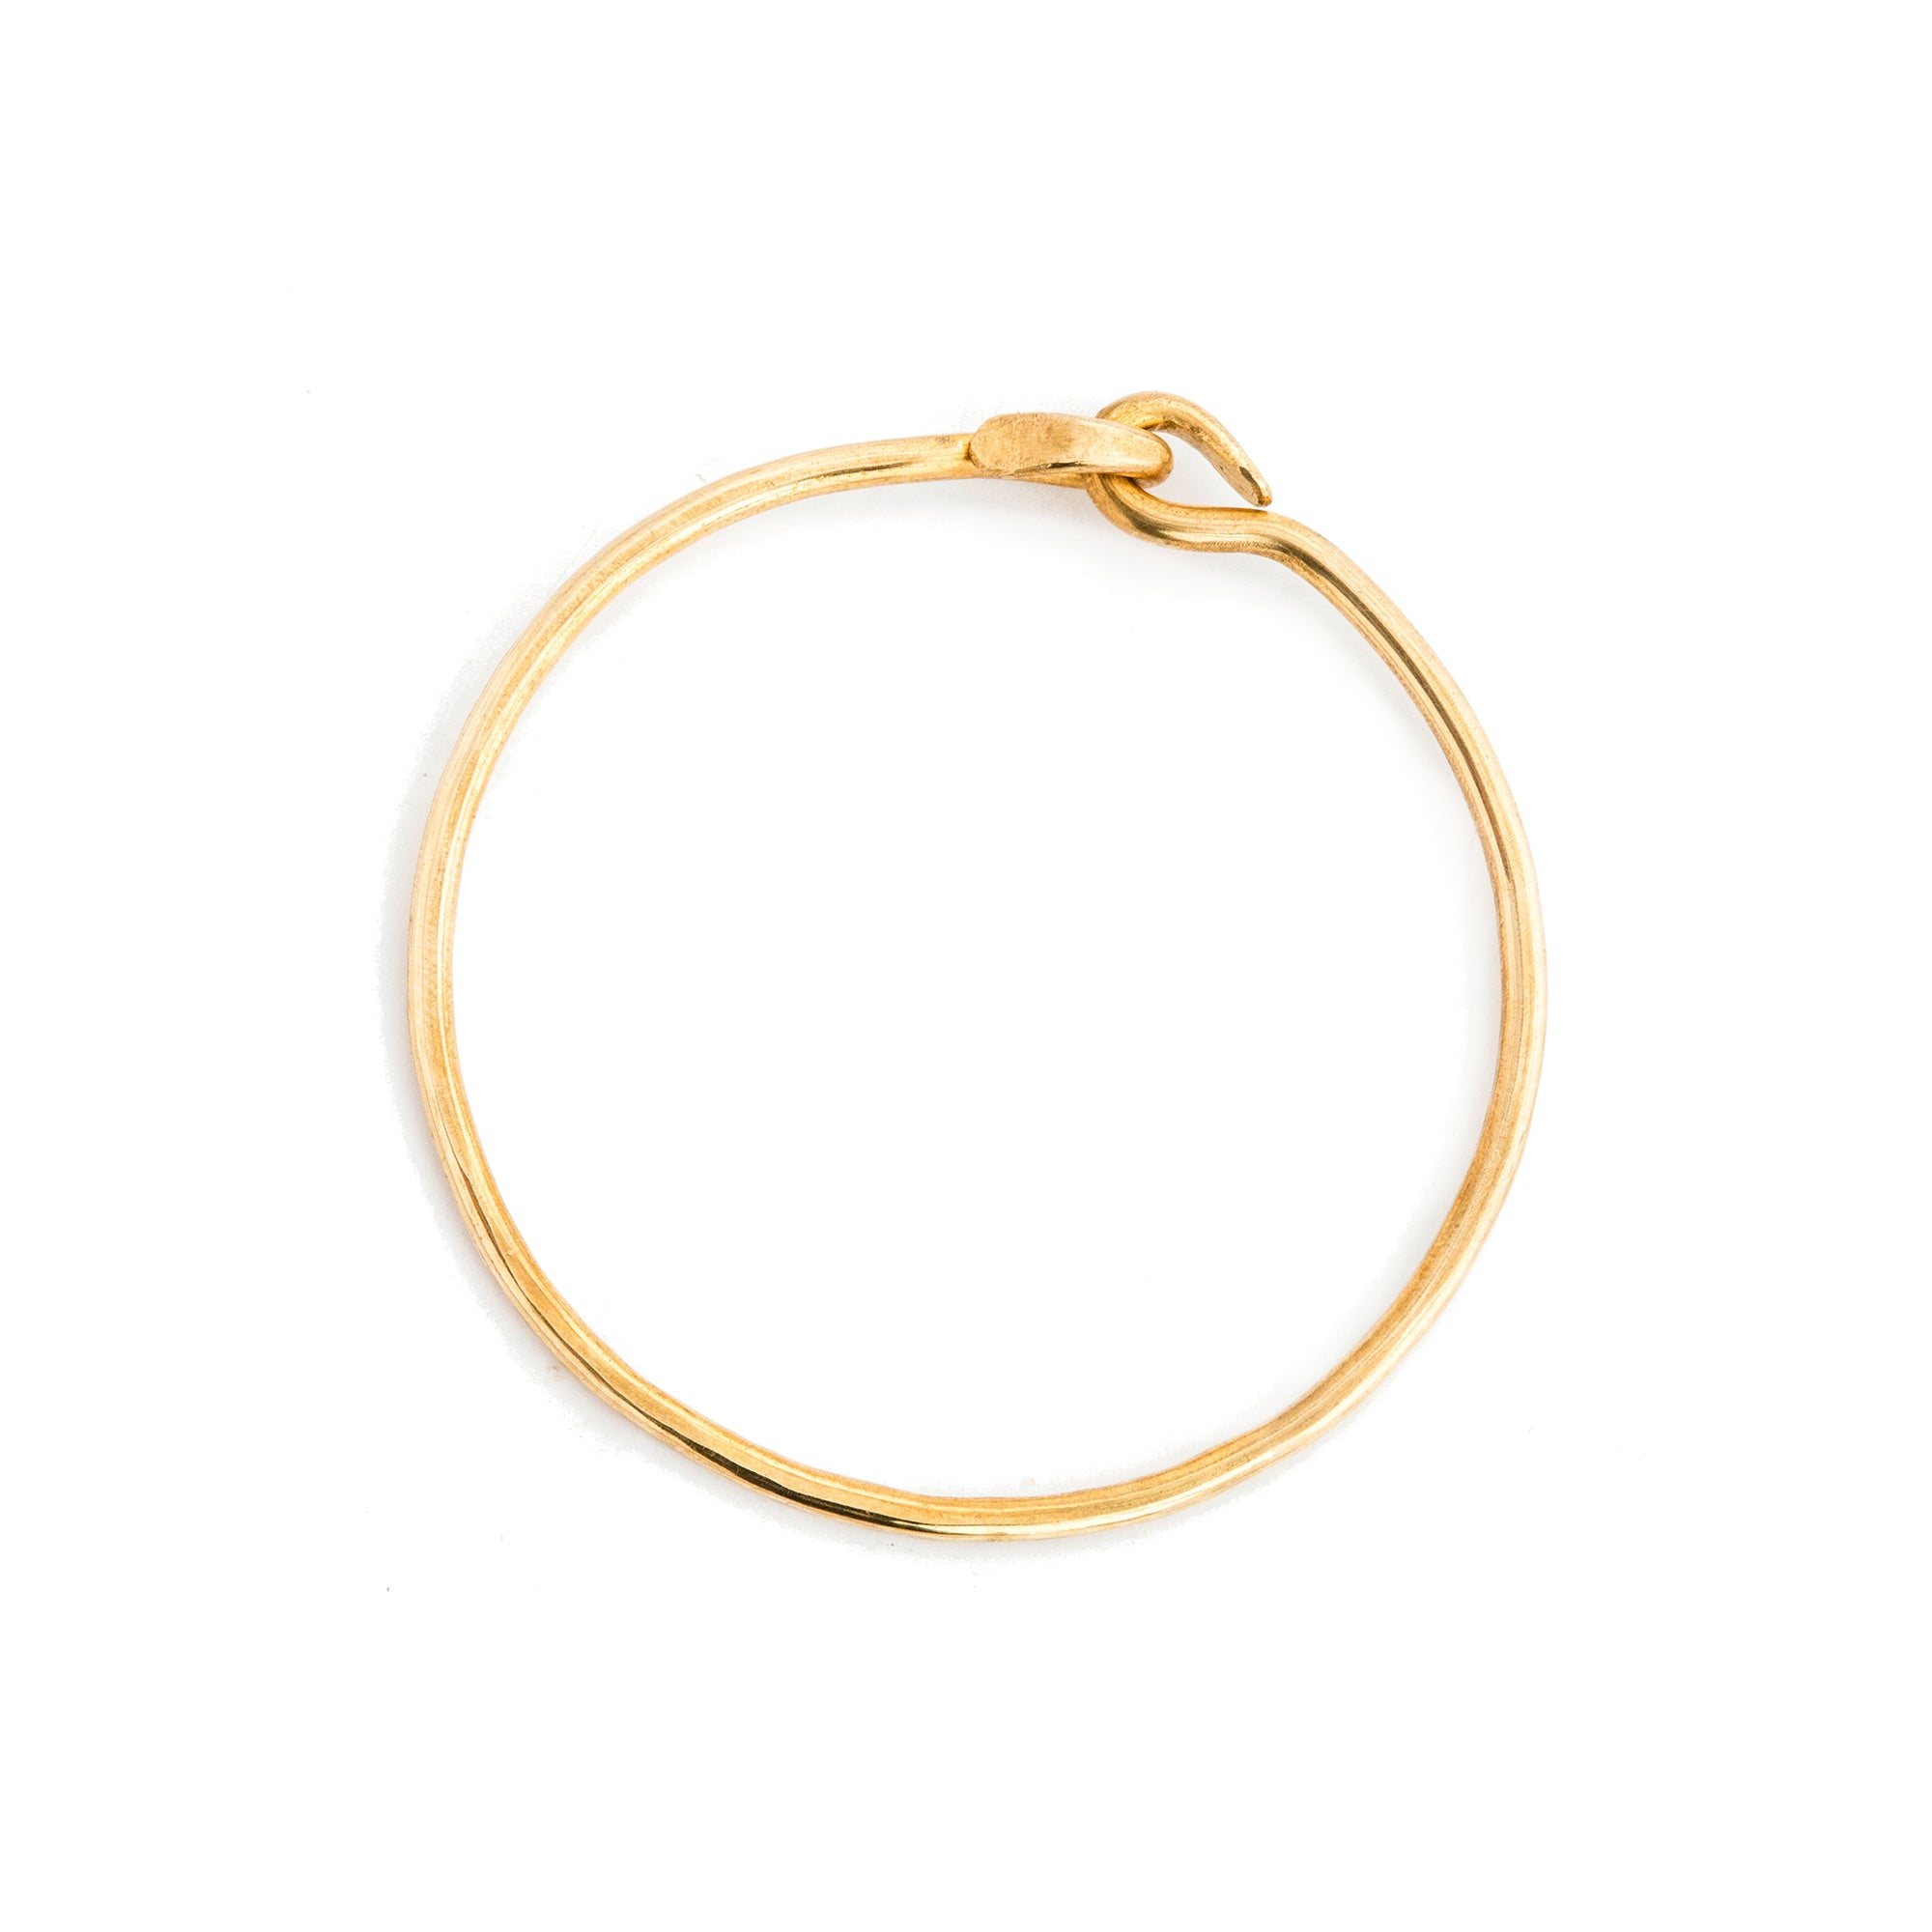 Thick and rustic, our Utilitarian bangle is hand-forged and hammered for a subtle texture